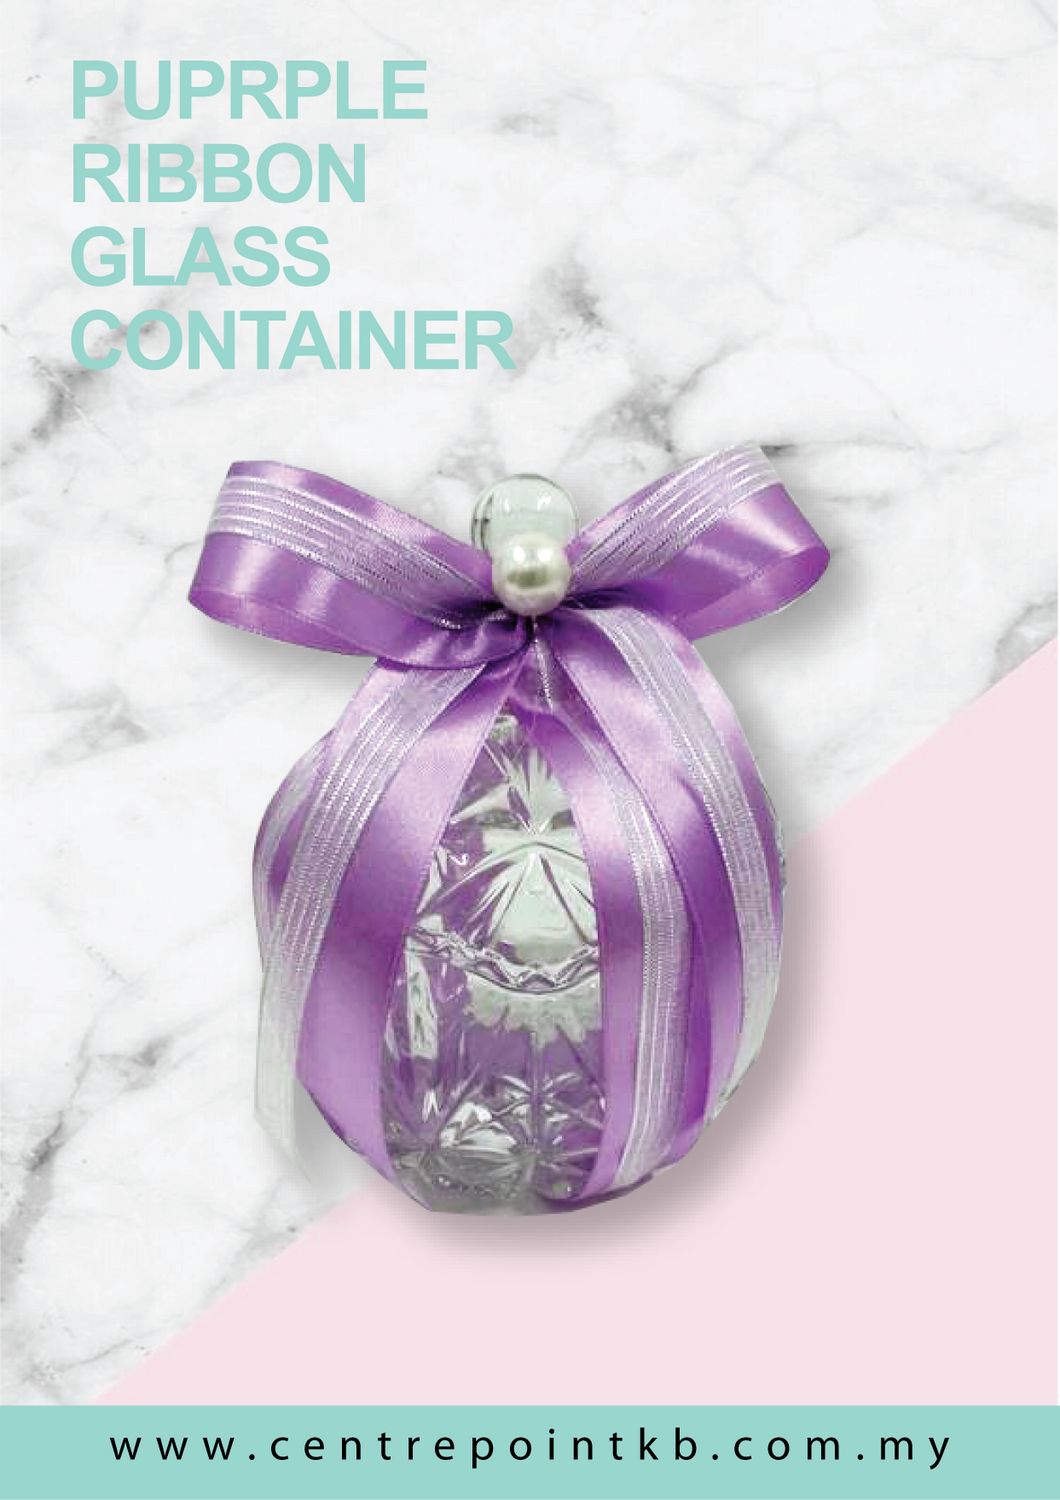 Purple Ribbon Glass Container (RM 4.50)